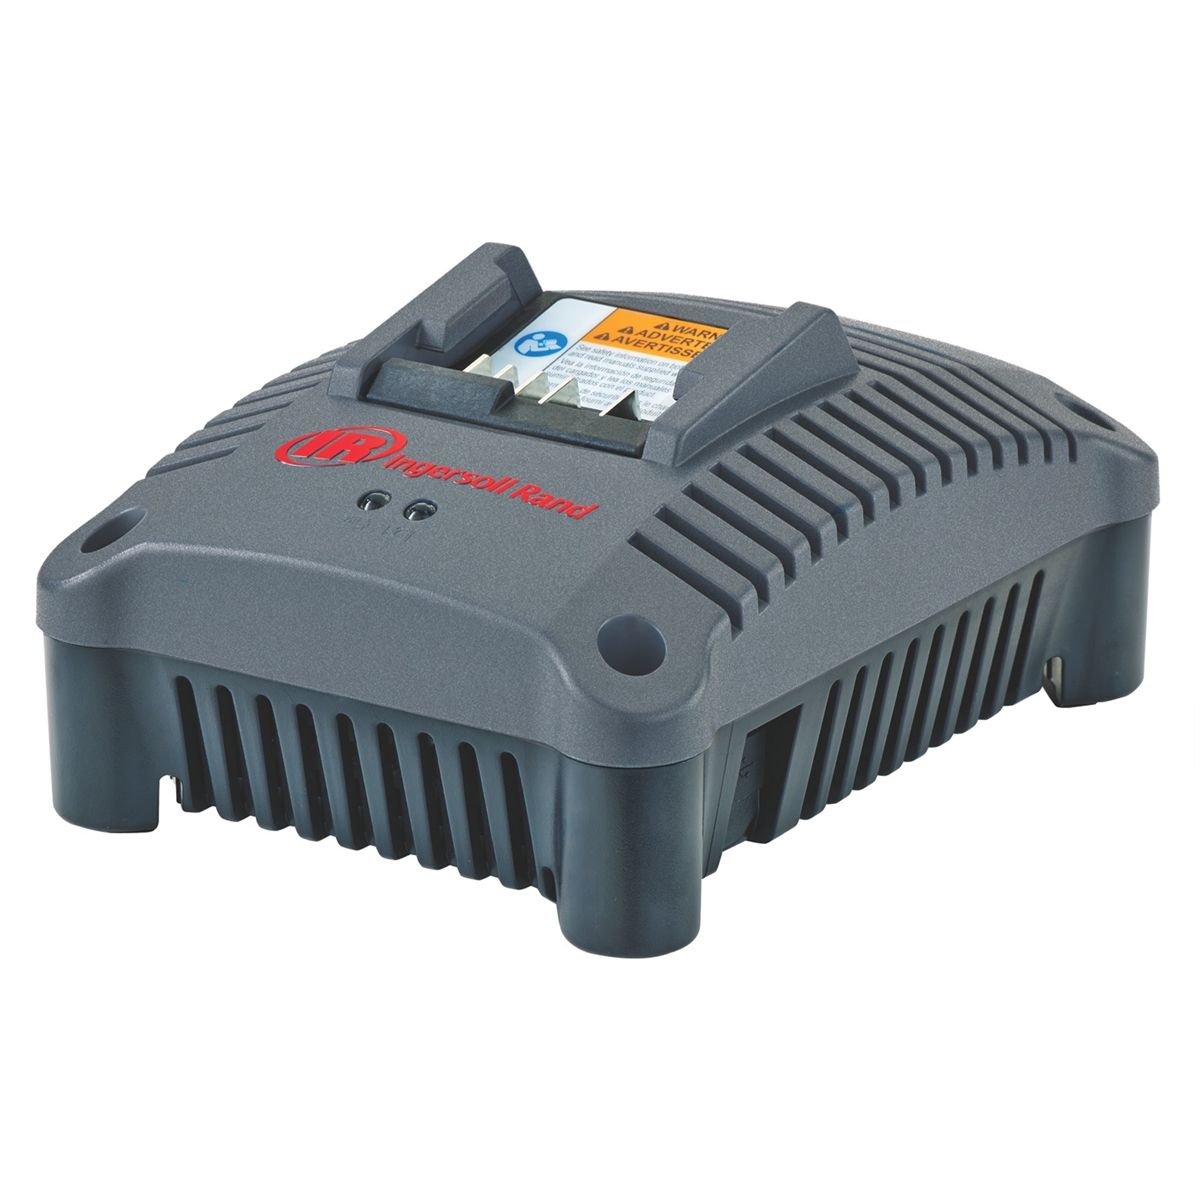 IQV12 Series Lithium-Ion Battery Charger